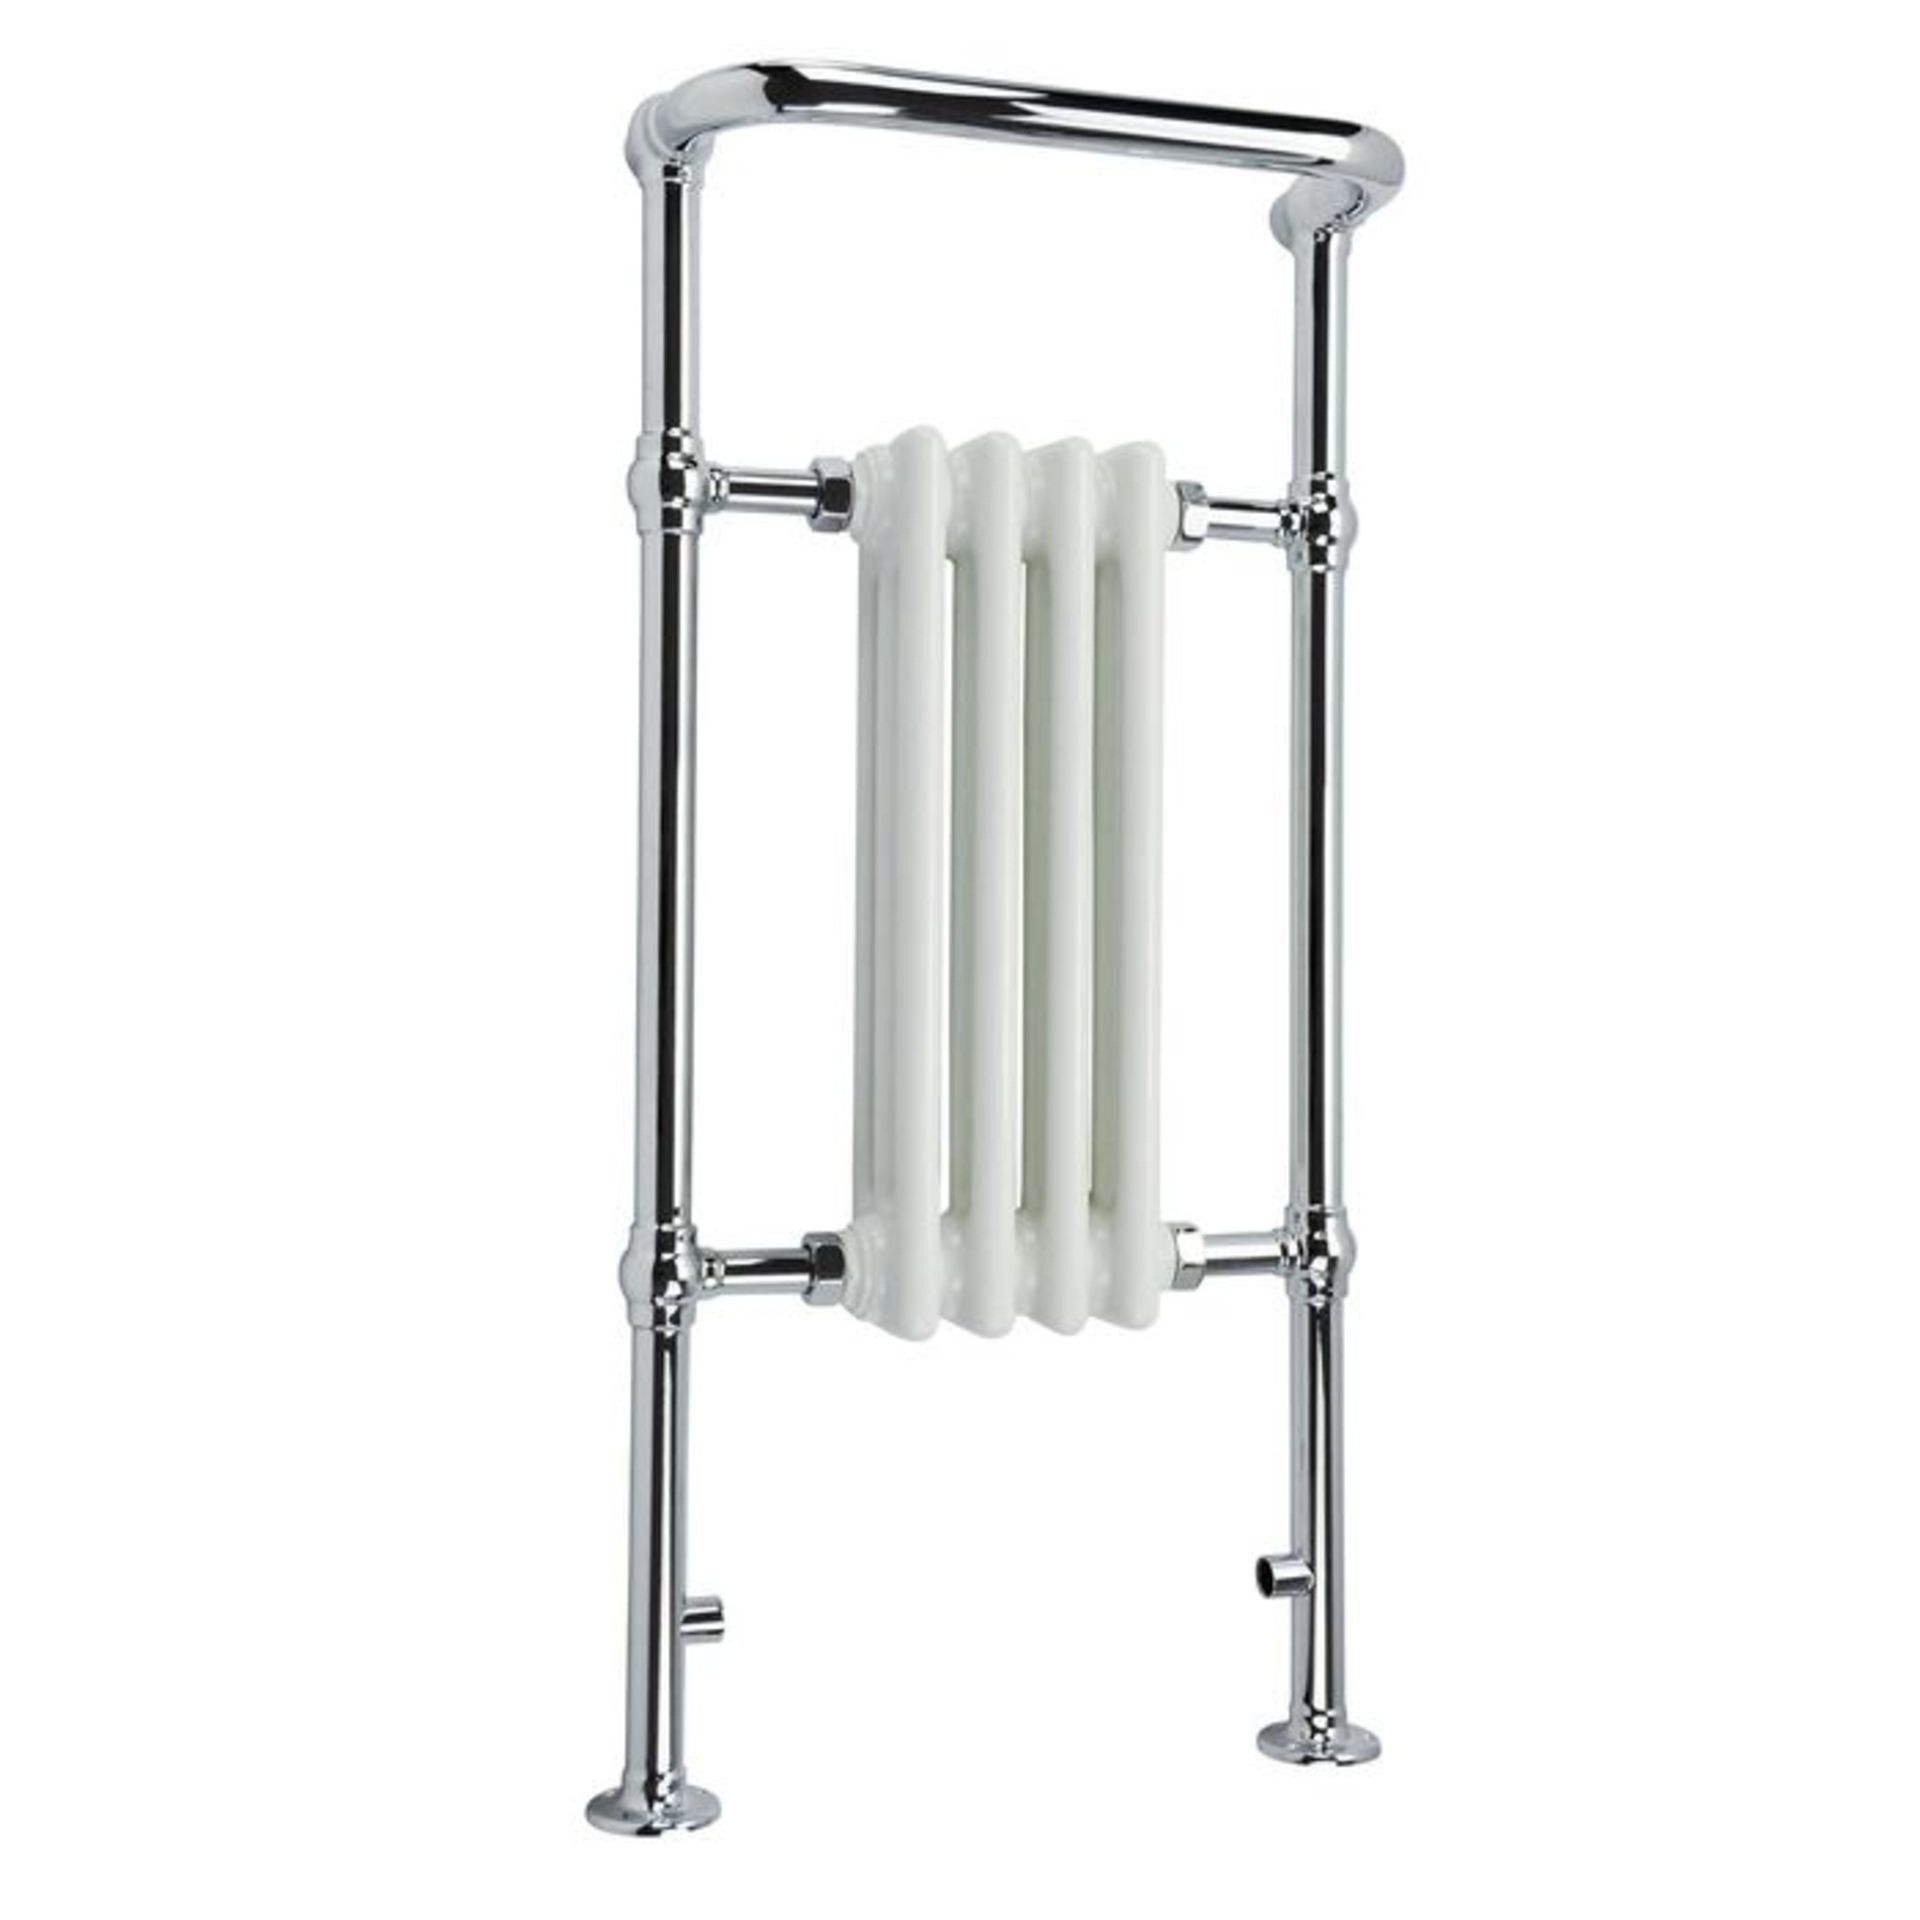 (OS216) 952x479mm Small Traditional White Towel Rail Radiator - Cambridge. We love this because it - Image 3 of 3